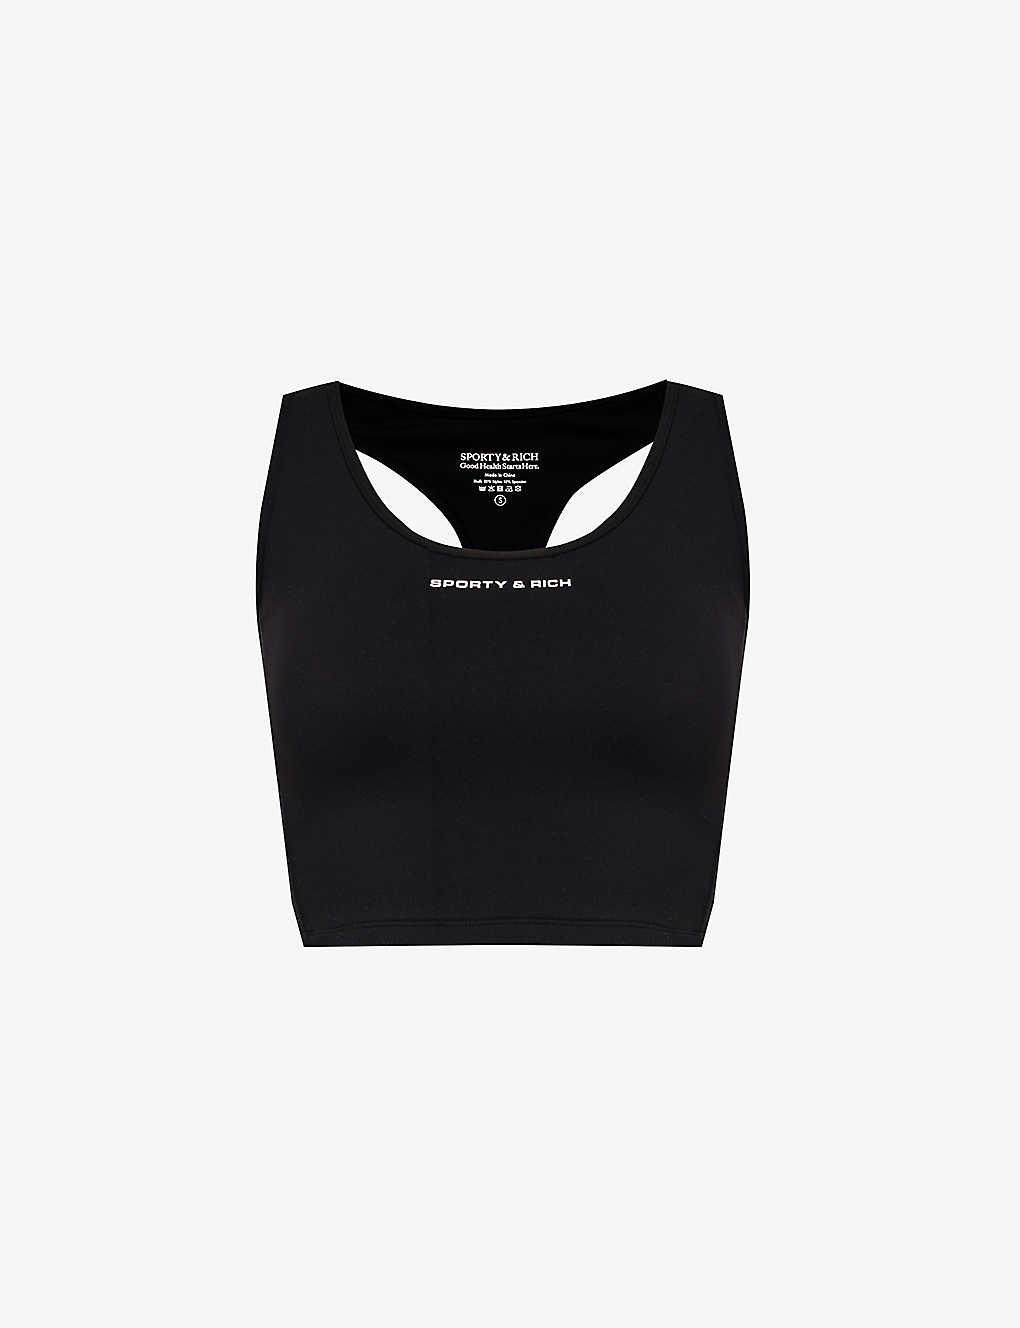 Shop Sporty And Rich Sporty & Rich Women's Black Logo-print Scoop-neck Stretch-woven Top